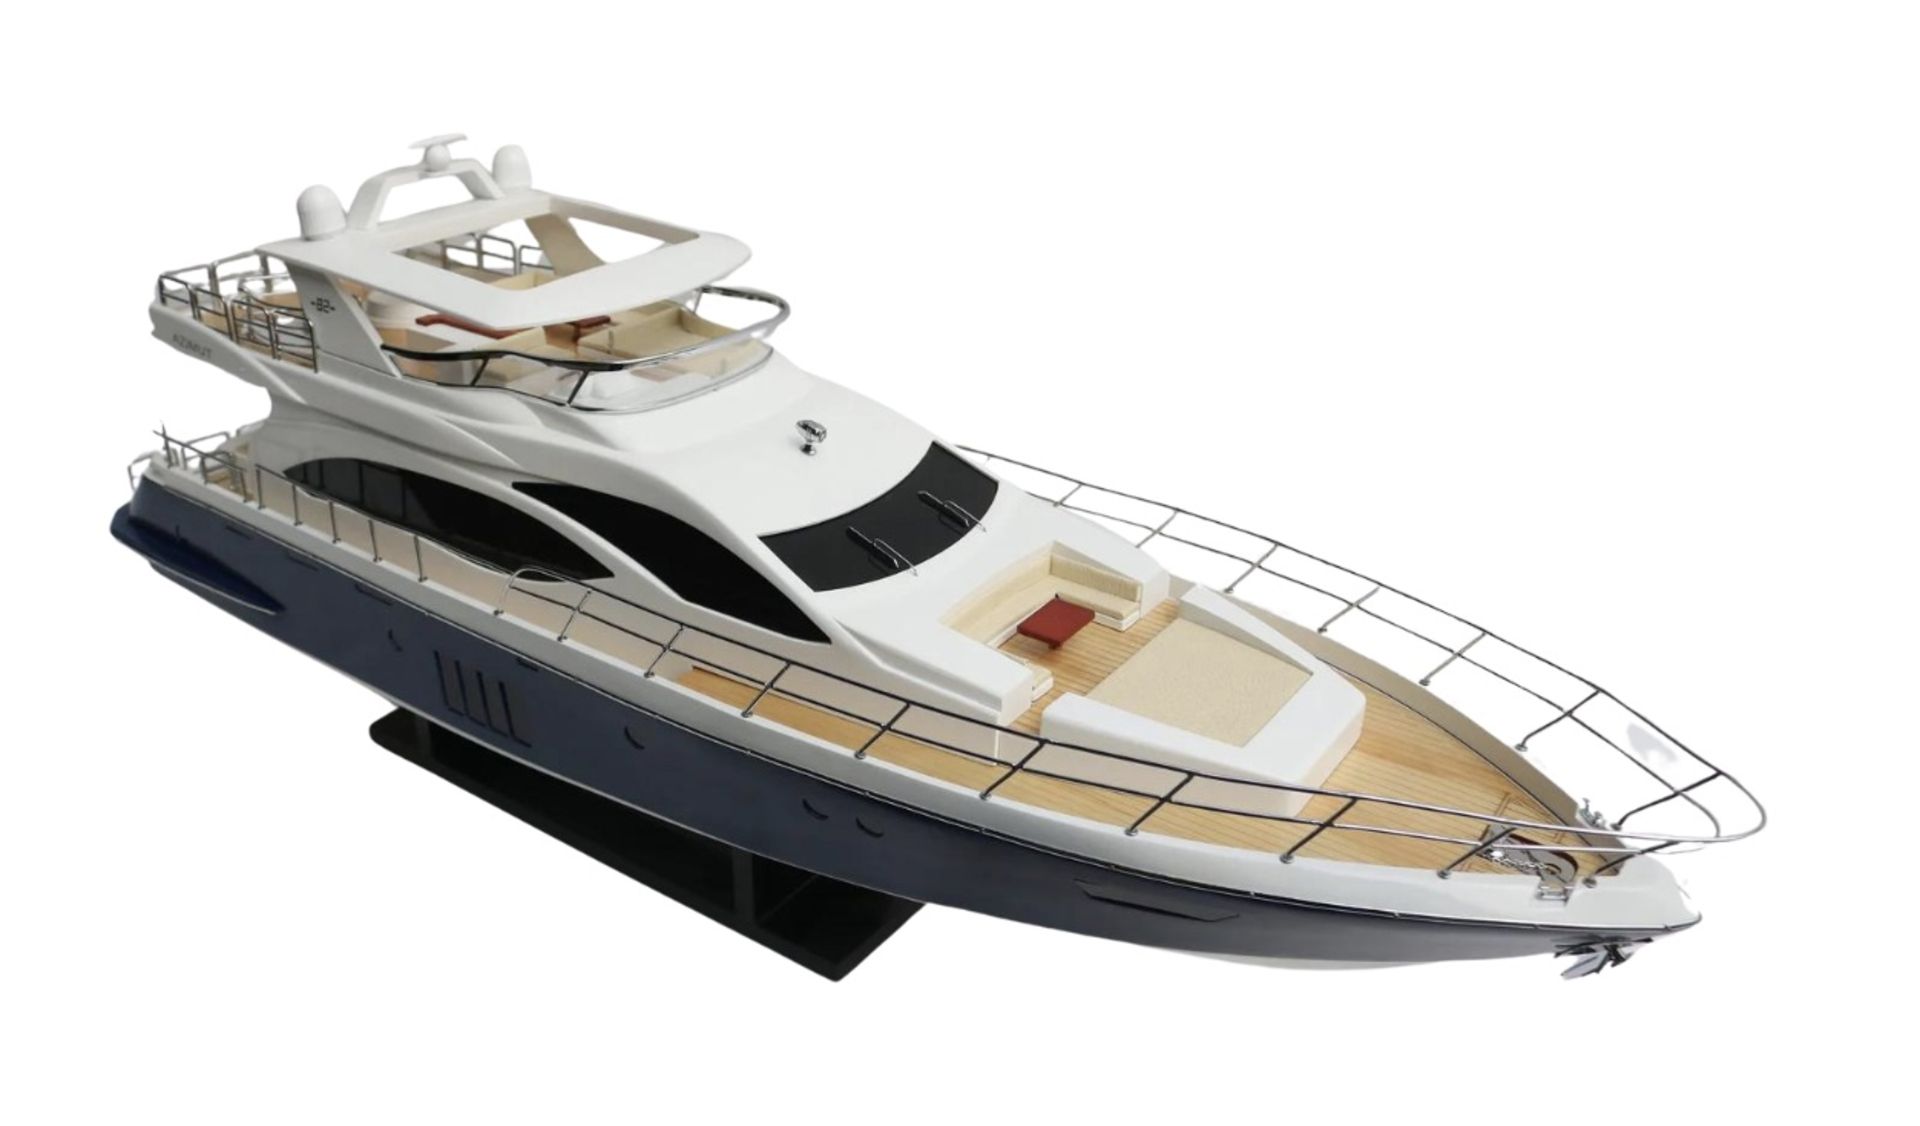 Azimut 82 Yacht Wooden Scale Desk Display Model - Image 10 of 10